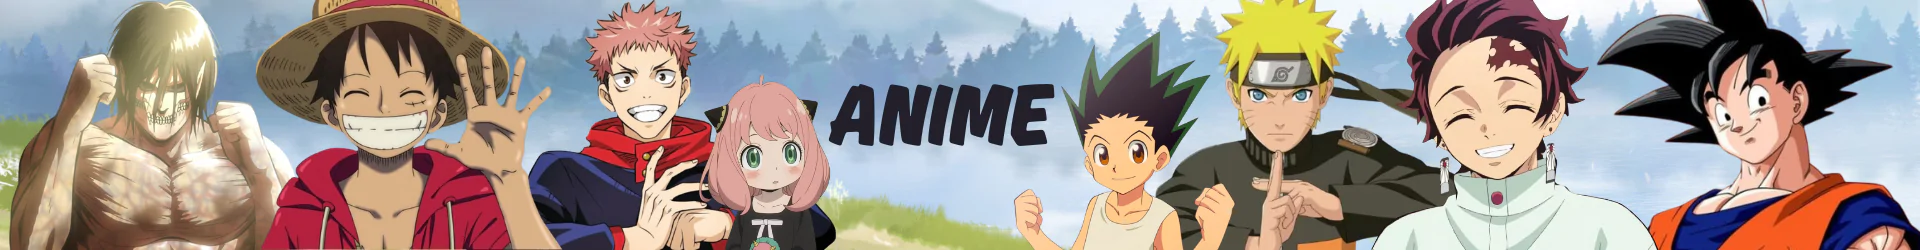 Anime Producte banner